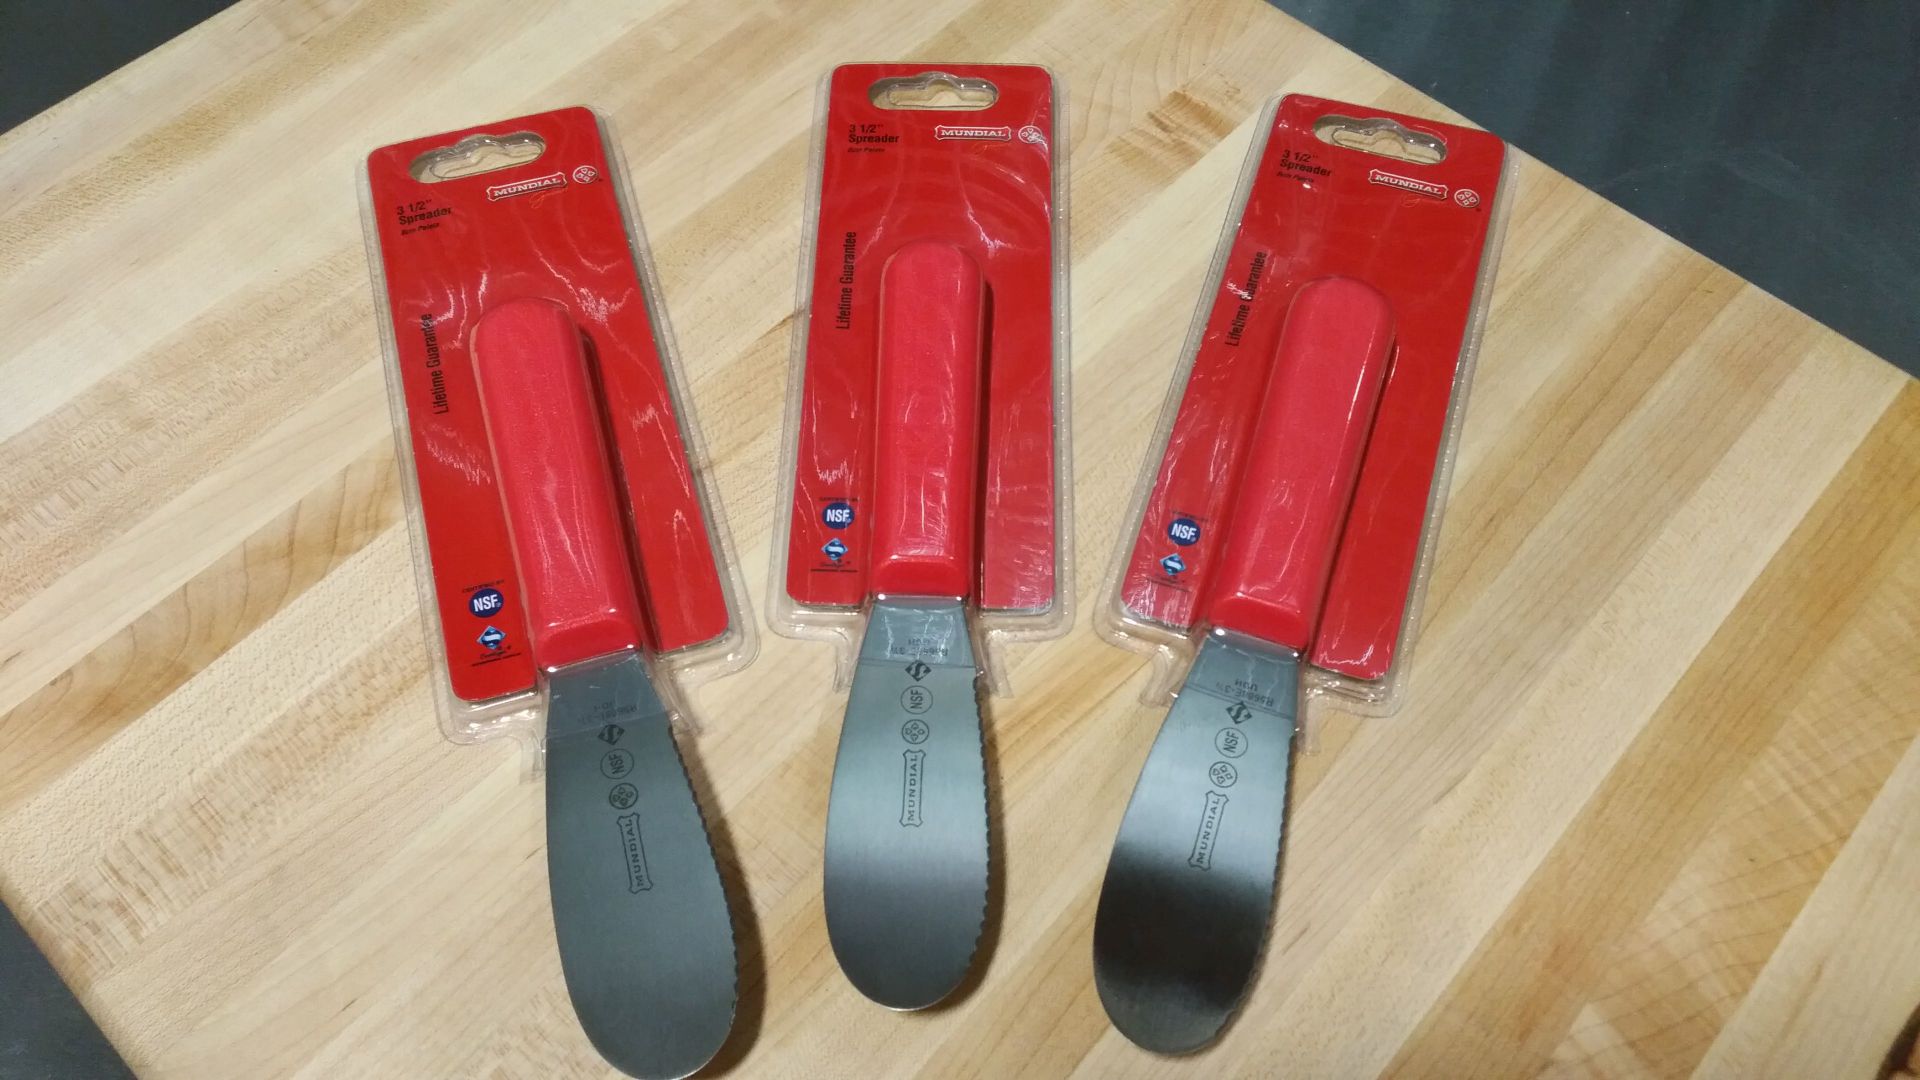 3.5" Serrated Sandwich Spreaders Mundial 5688E-3-1/2 - Lot of 3 (Retail Packaging) - Image 3 of 3